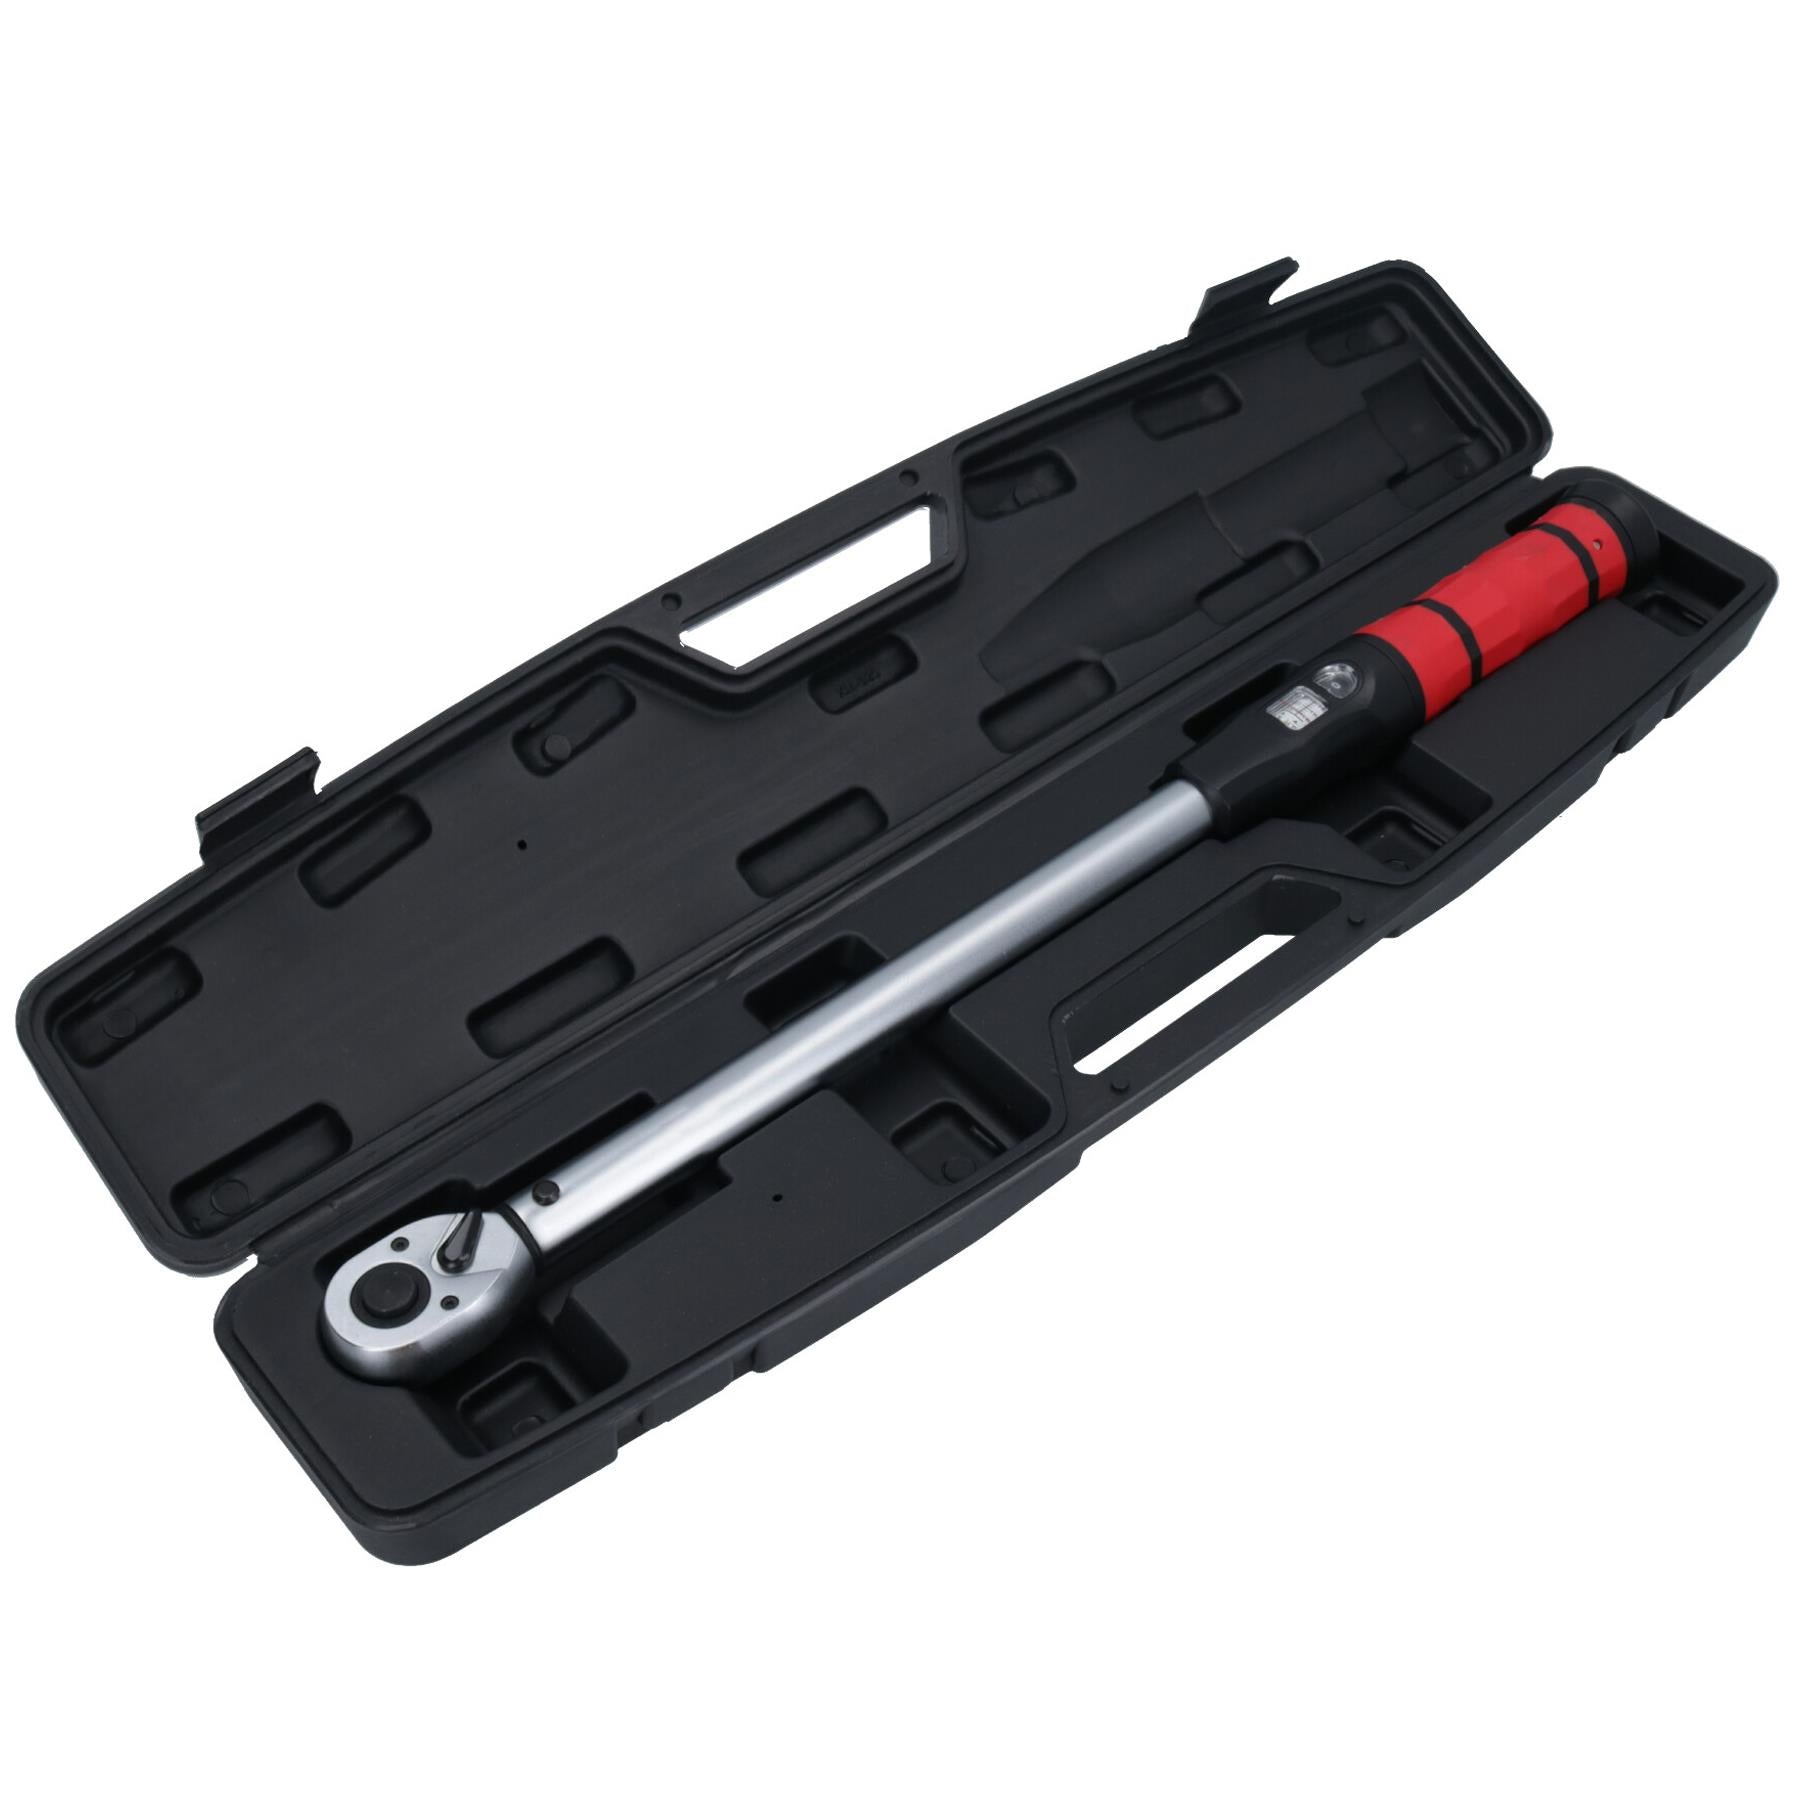 1/2" Drive Torque Wrenches